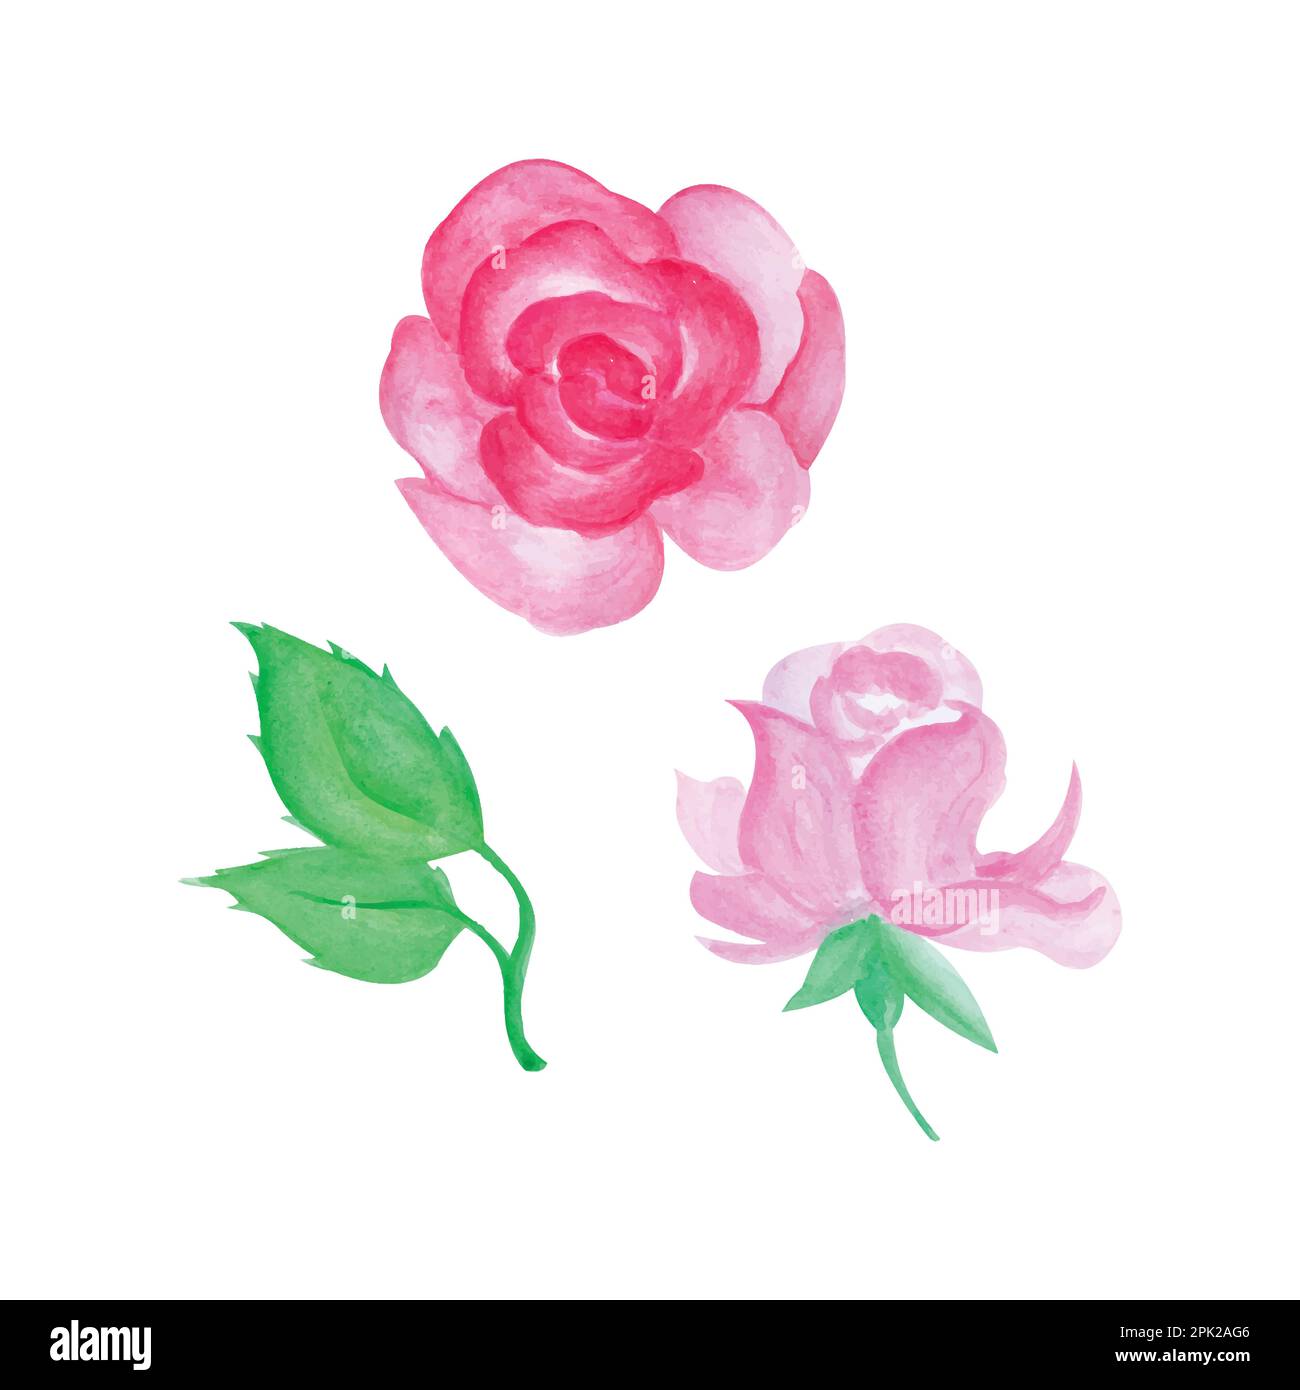 Hand painted rose, hand drawn watercolor vector illustration for greeting card or invitation design Stock Vector